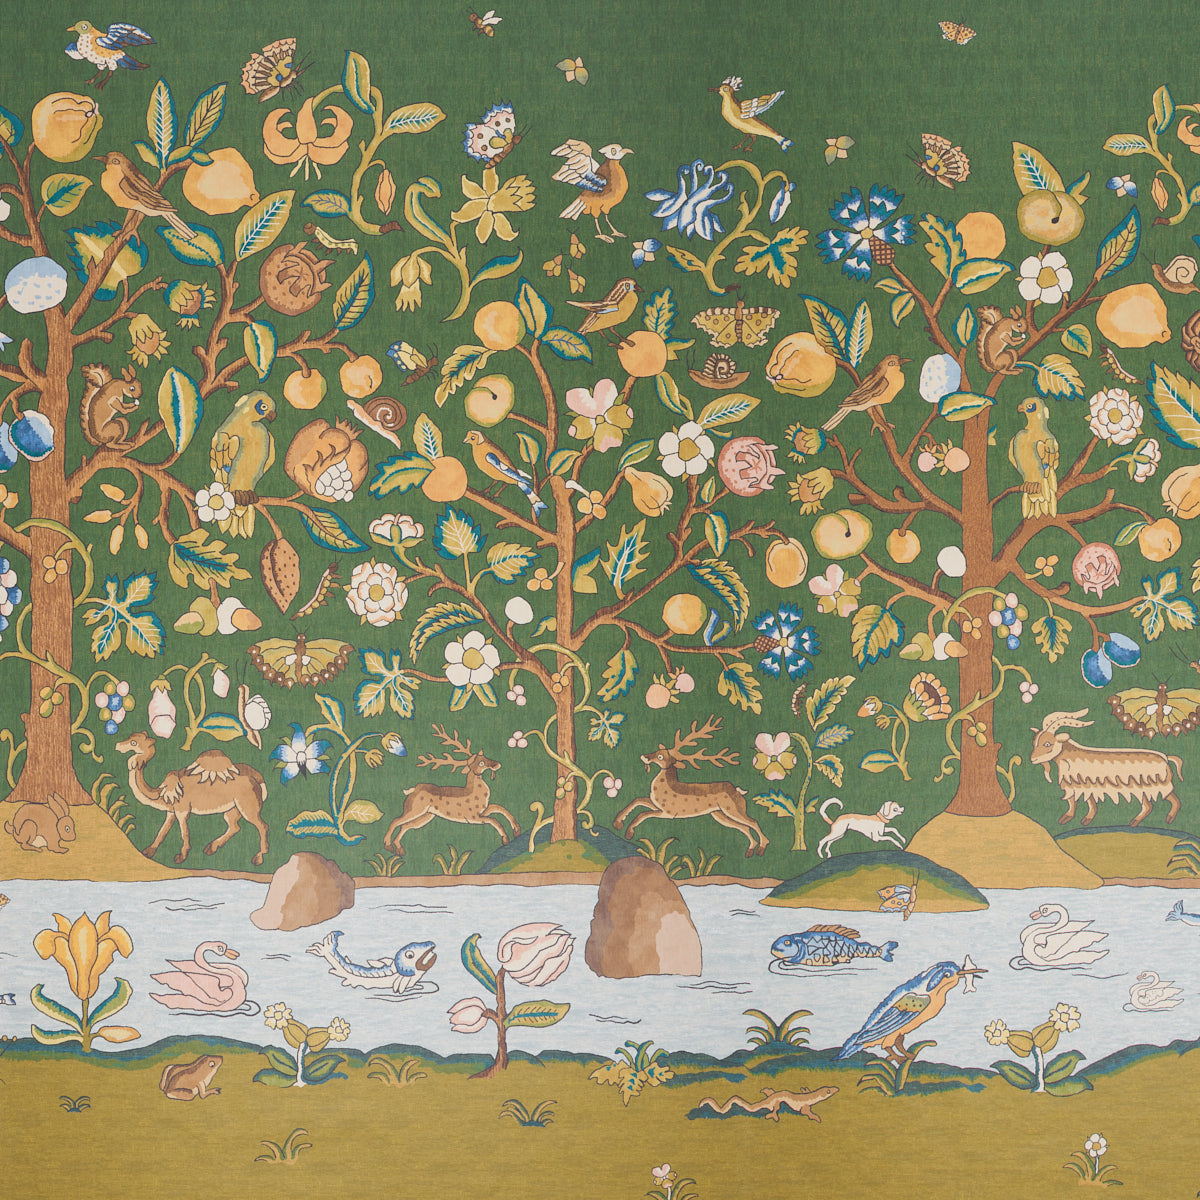 CHAUCER'S FOREST PANEL SET | DOCUMENT